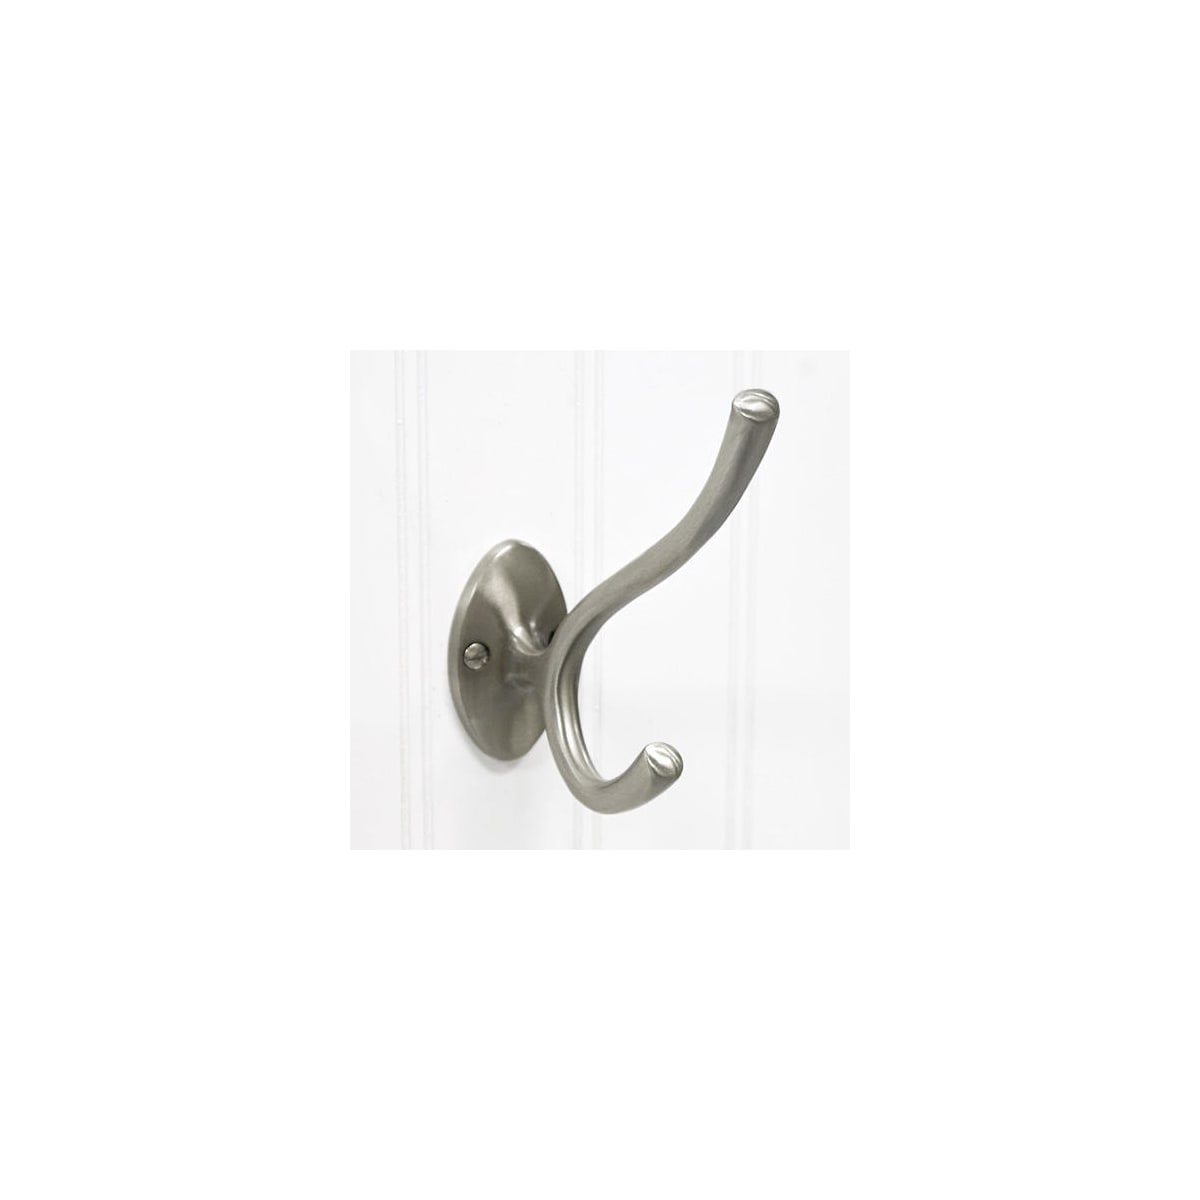 Franklin Brass Ruavista Double Prong Coat and Hat Hook - 5 Pack